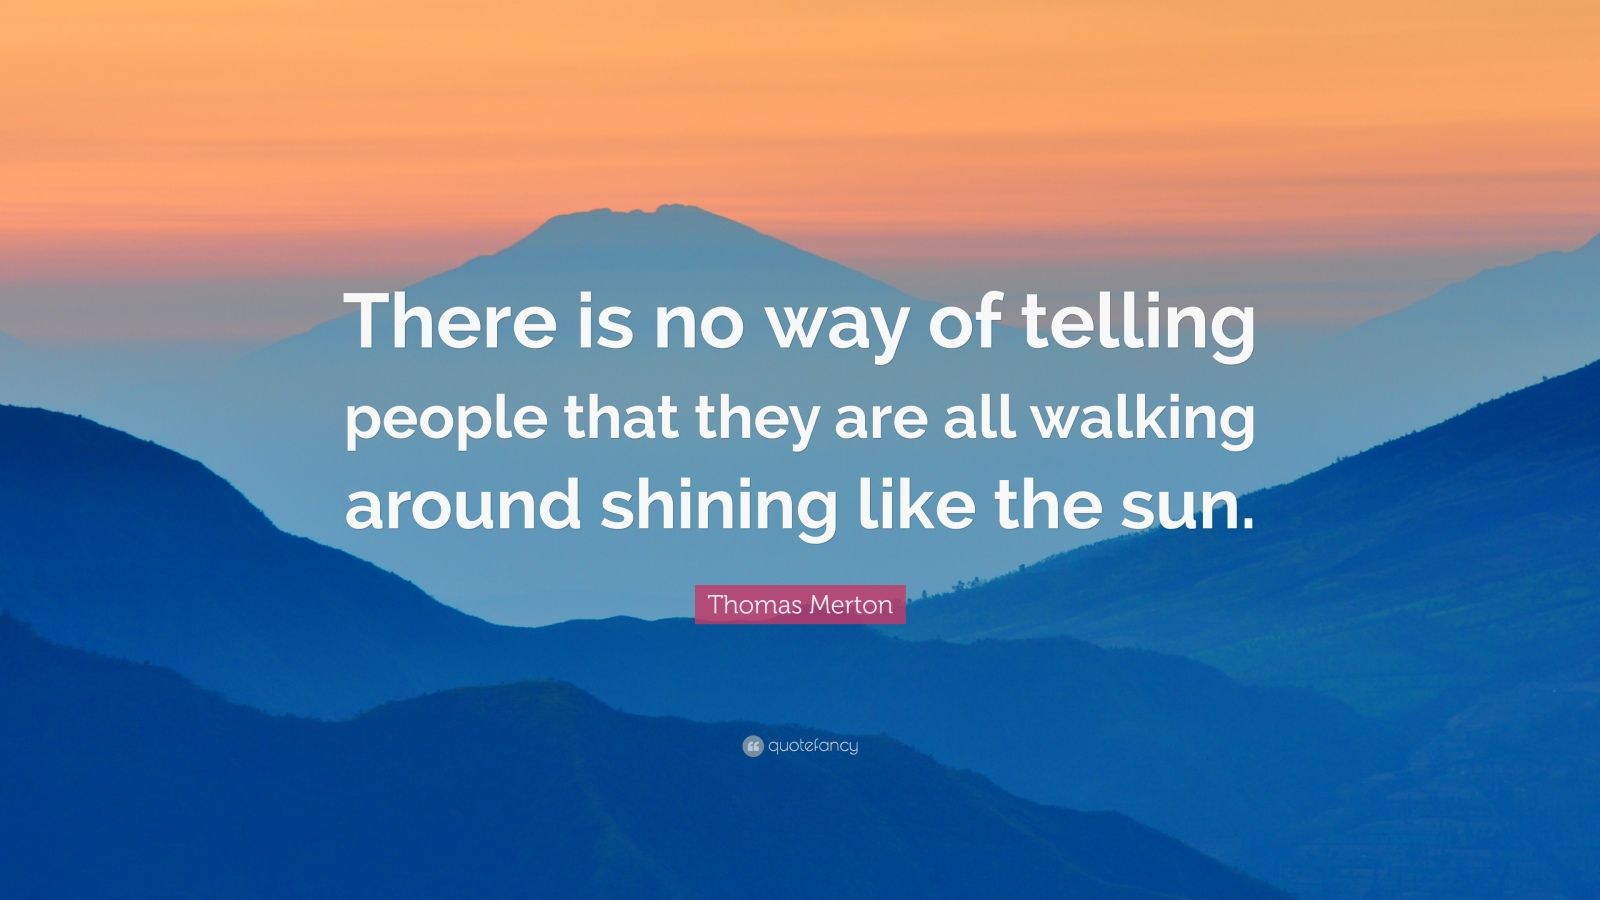 Thomas Merton Quote: “There is no way of telling people that they are